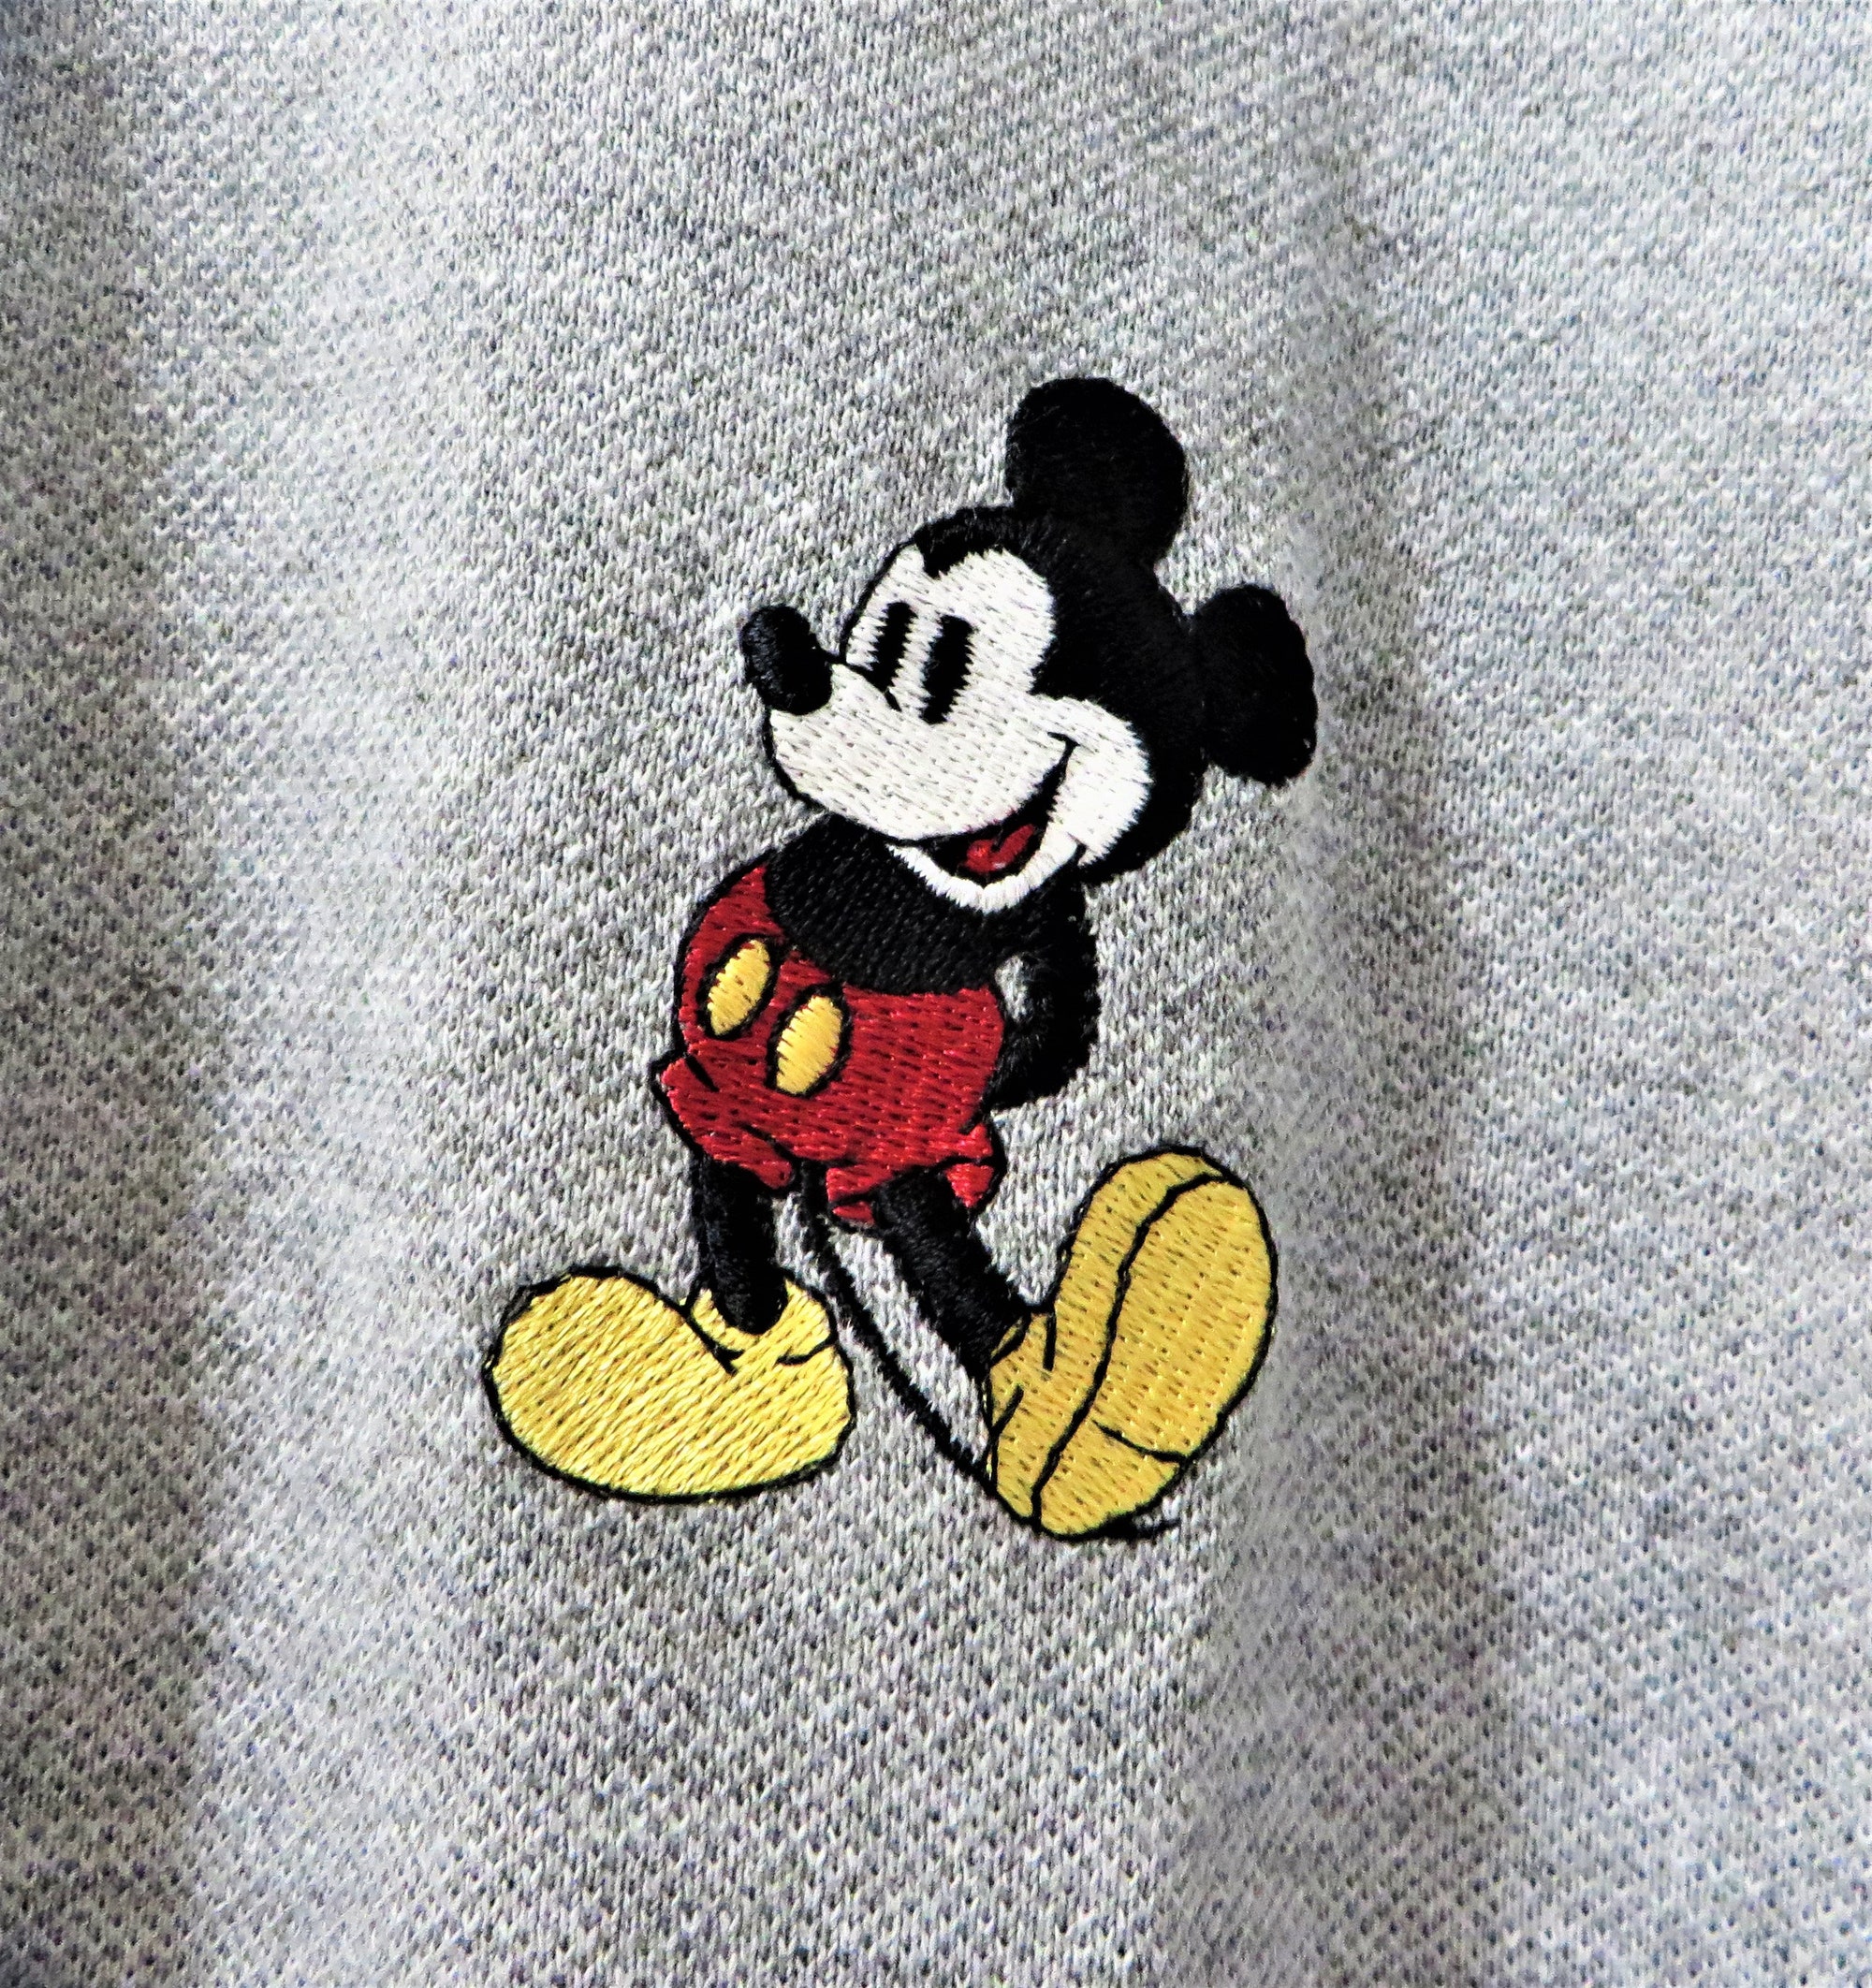 Discover 90s New Vintage Embroidered Classic Mickey Mouse Disney Polo Shirt Heather Gray Short Sleeve Pullover